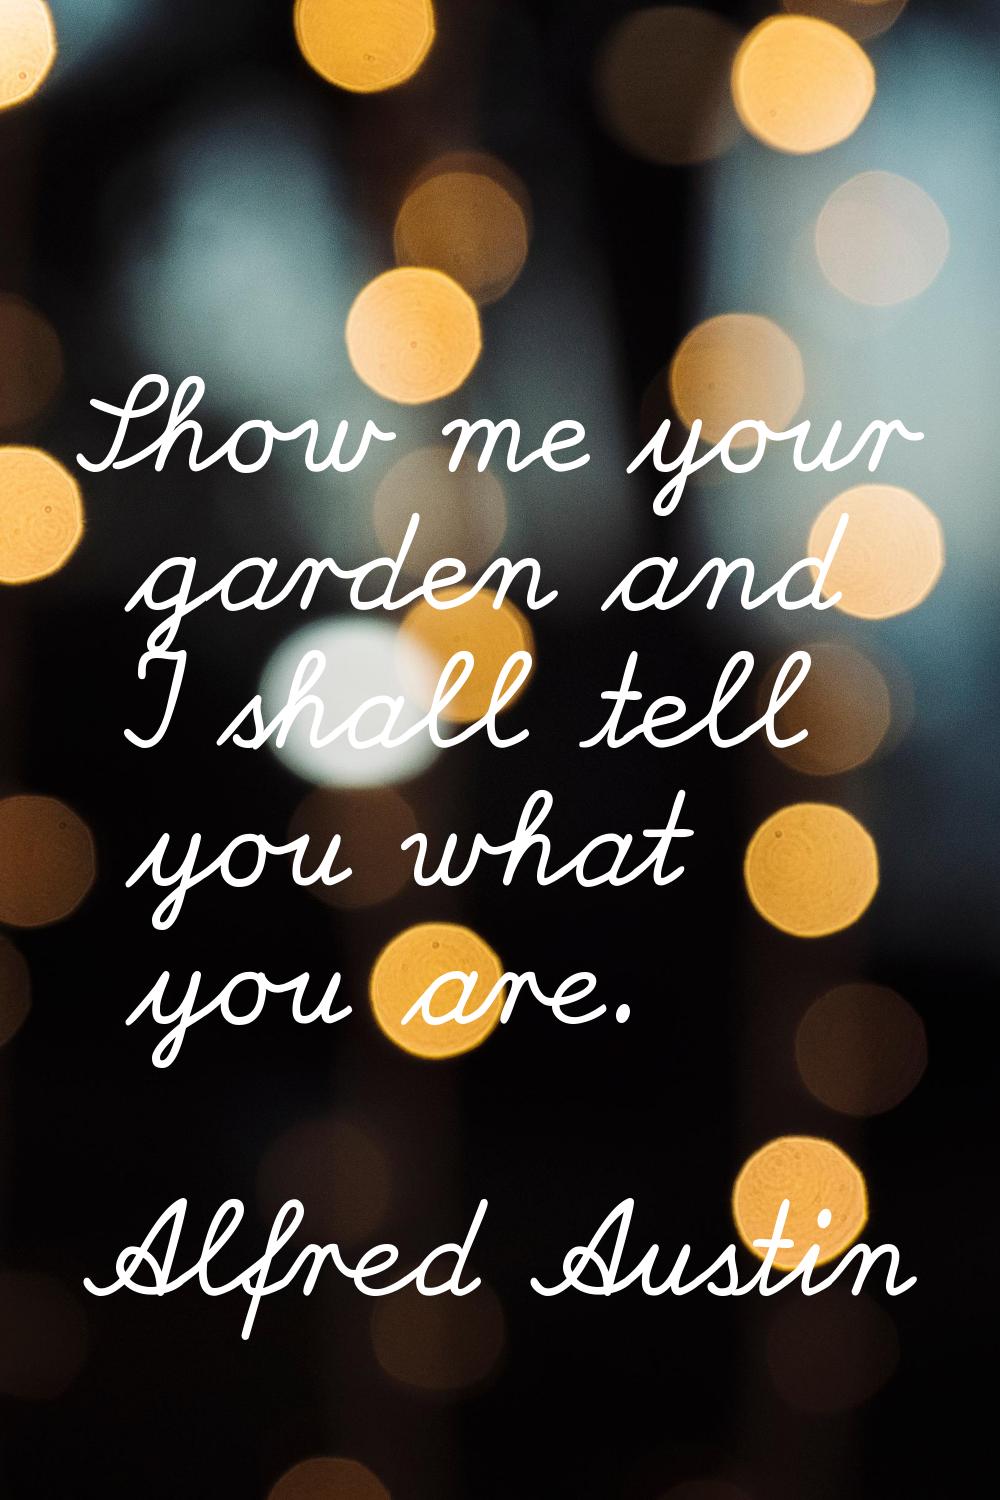 Show me your garden and I shall tell you what you are.